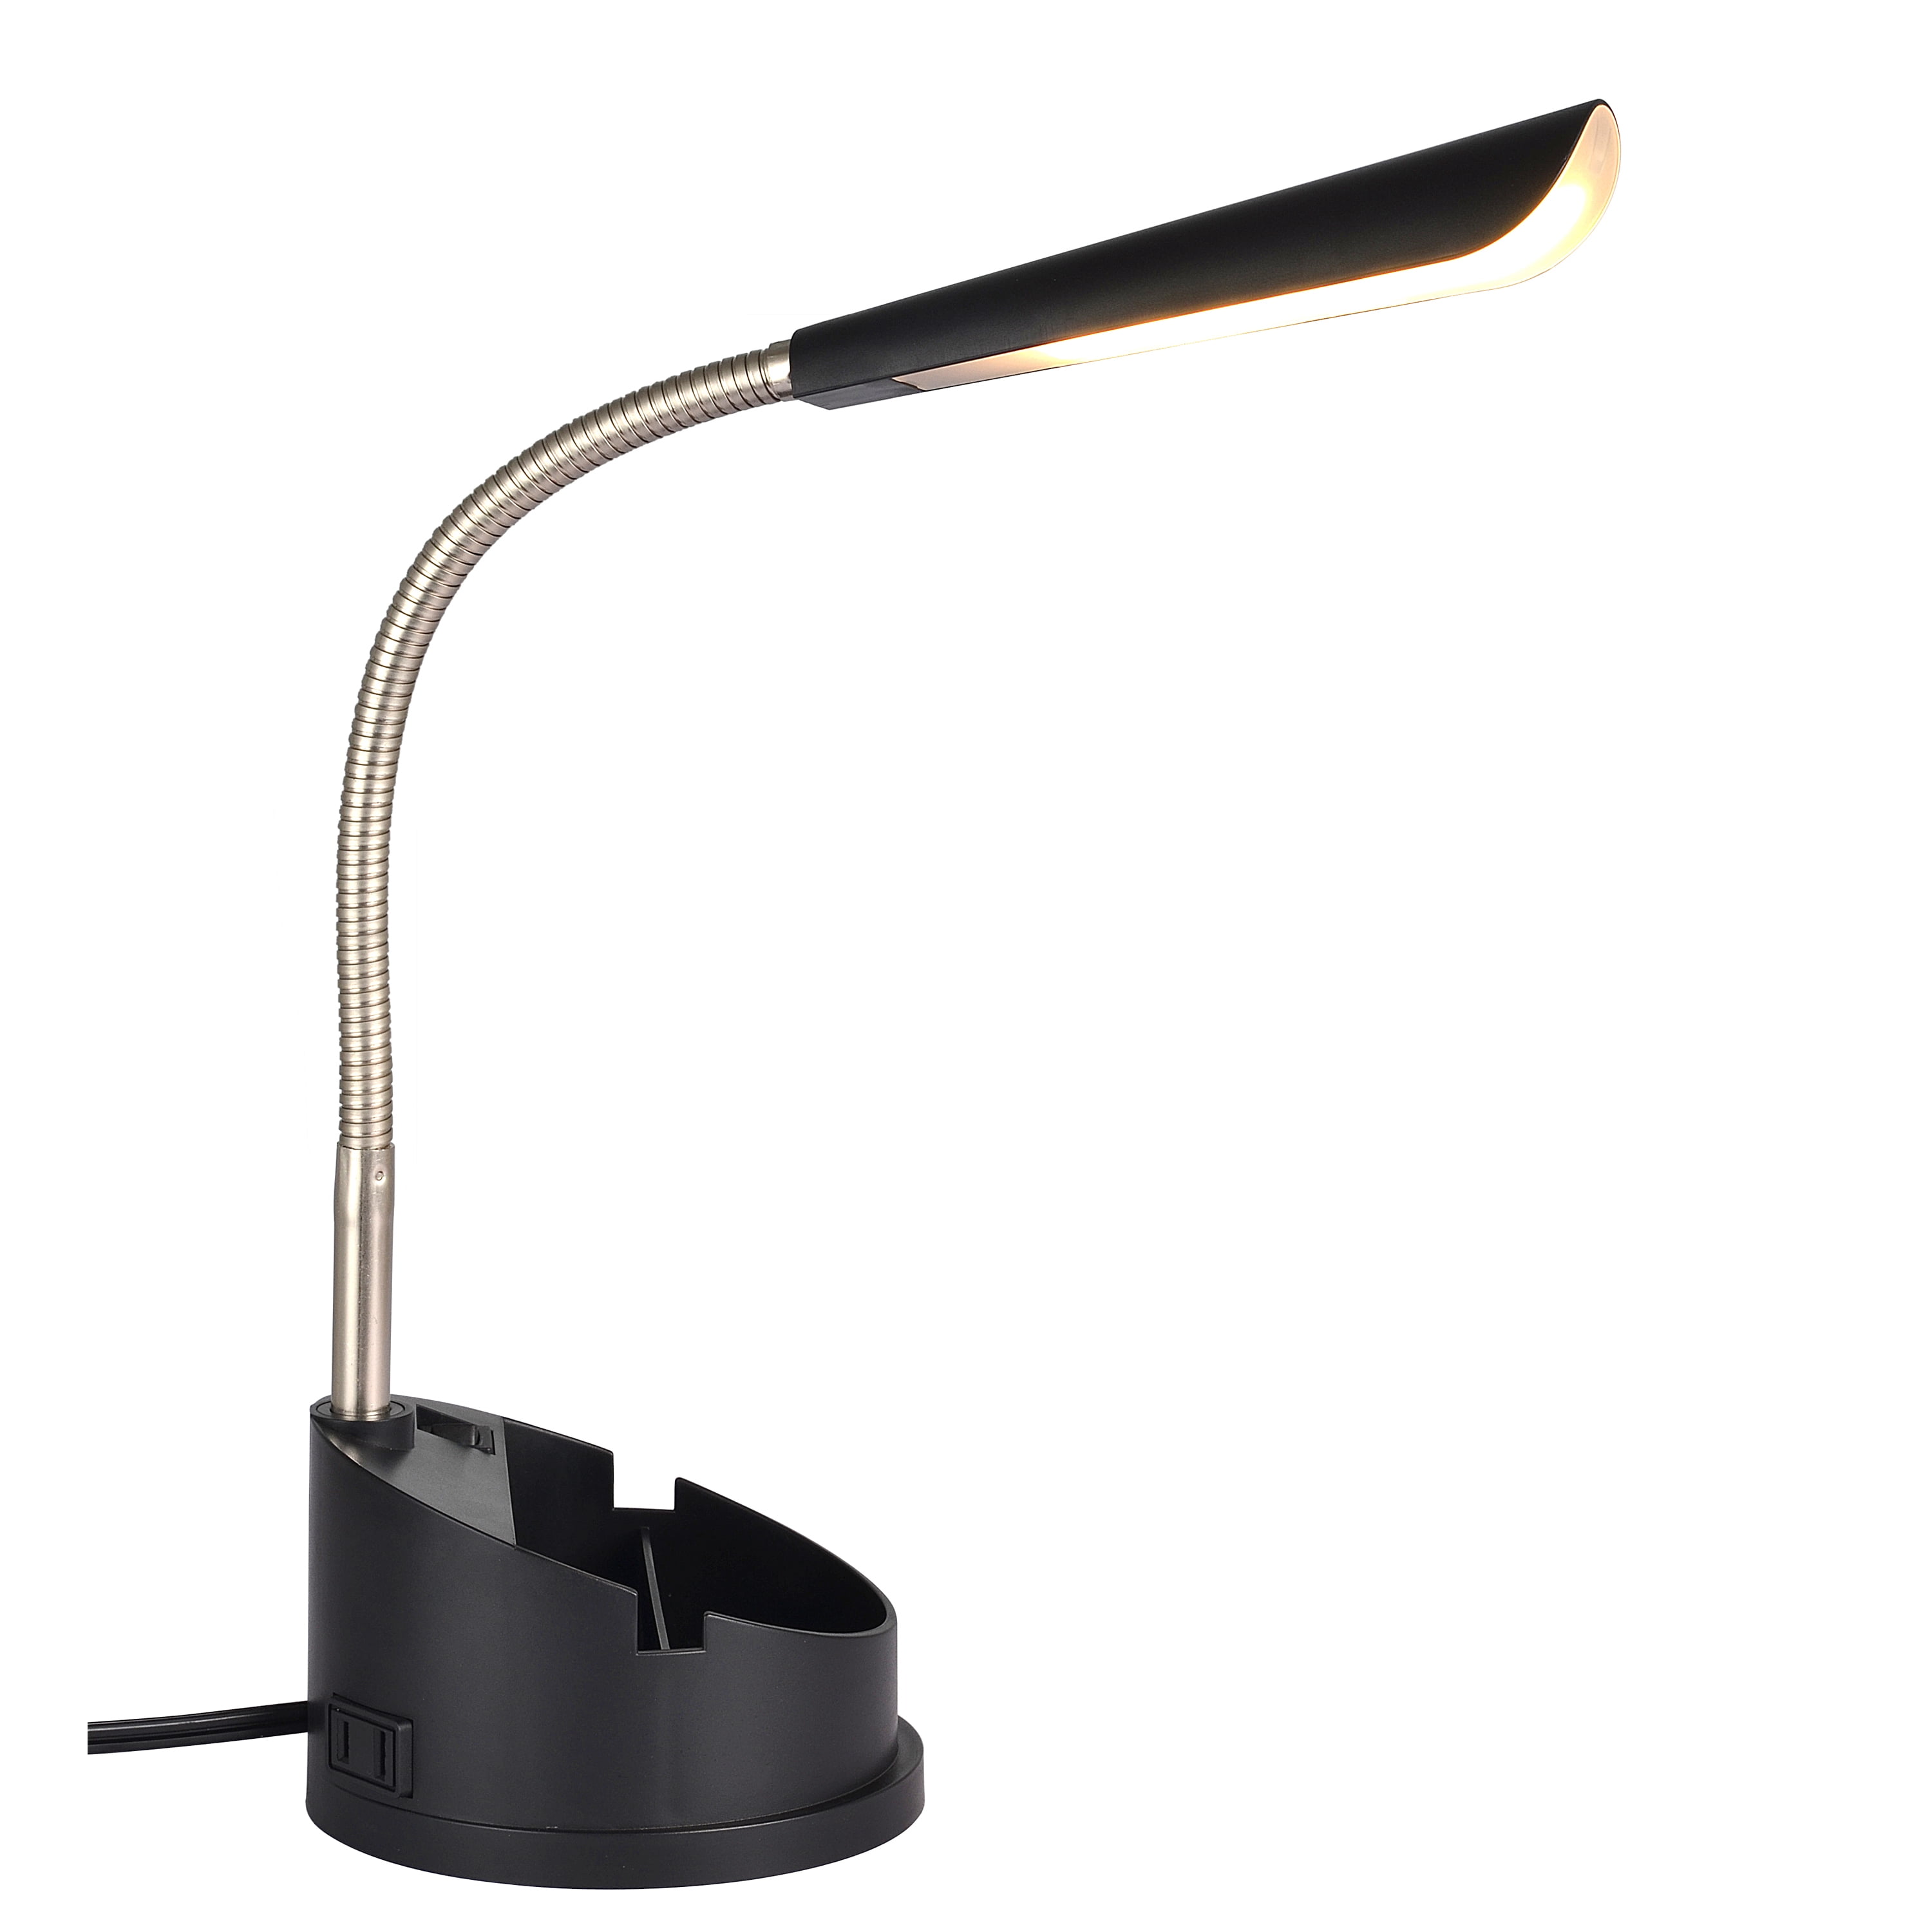 5 Diopter Magnifying Desk Lamp with USB Power Adapter – The Salon Outlet